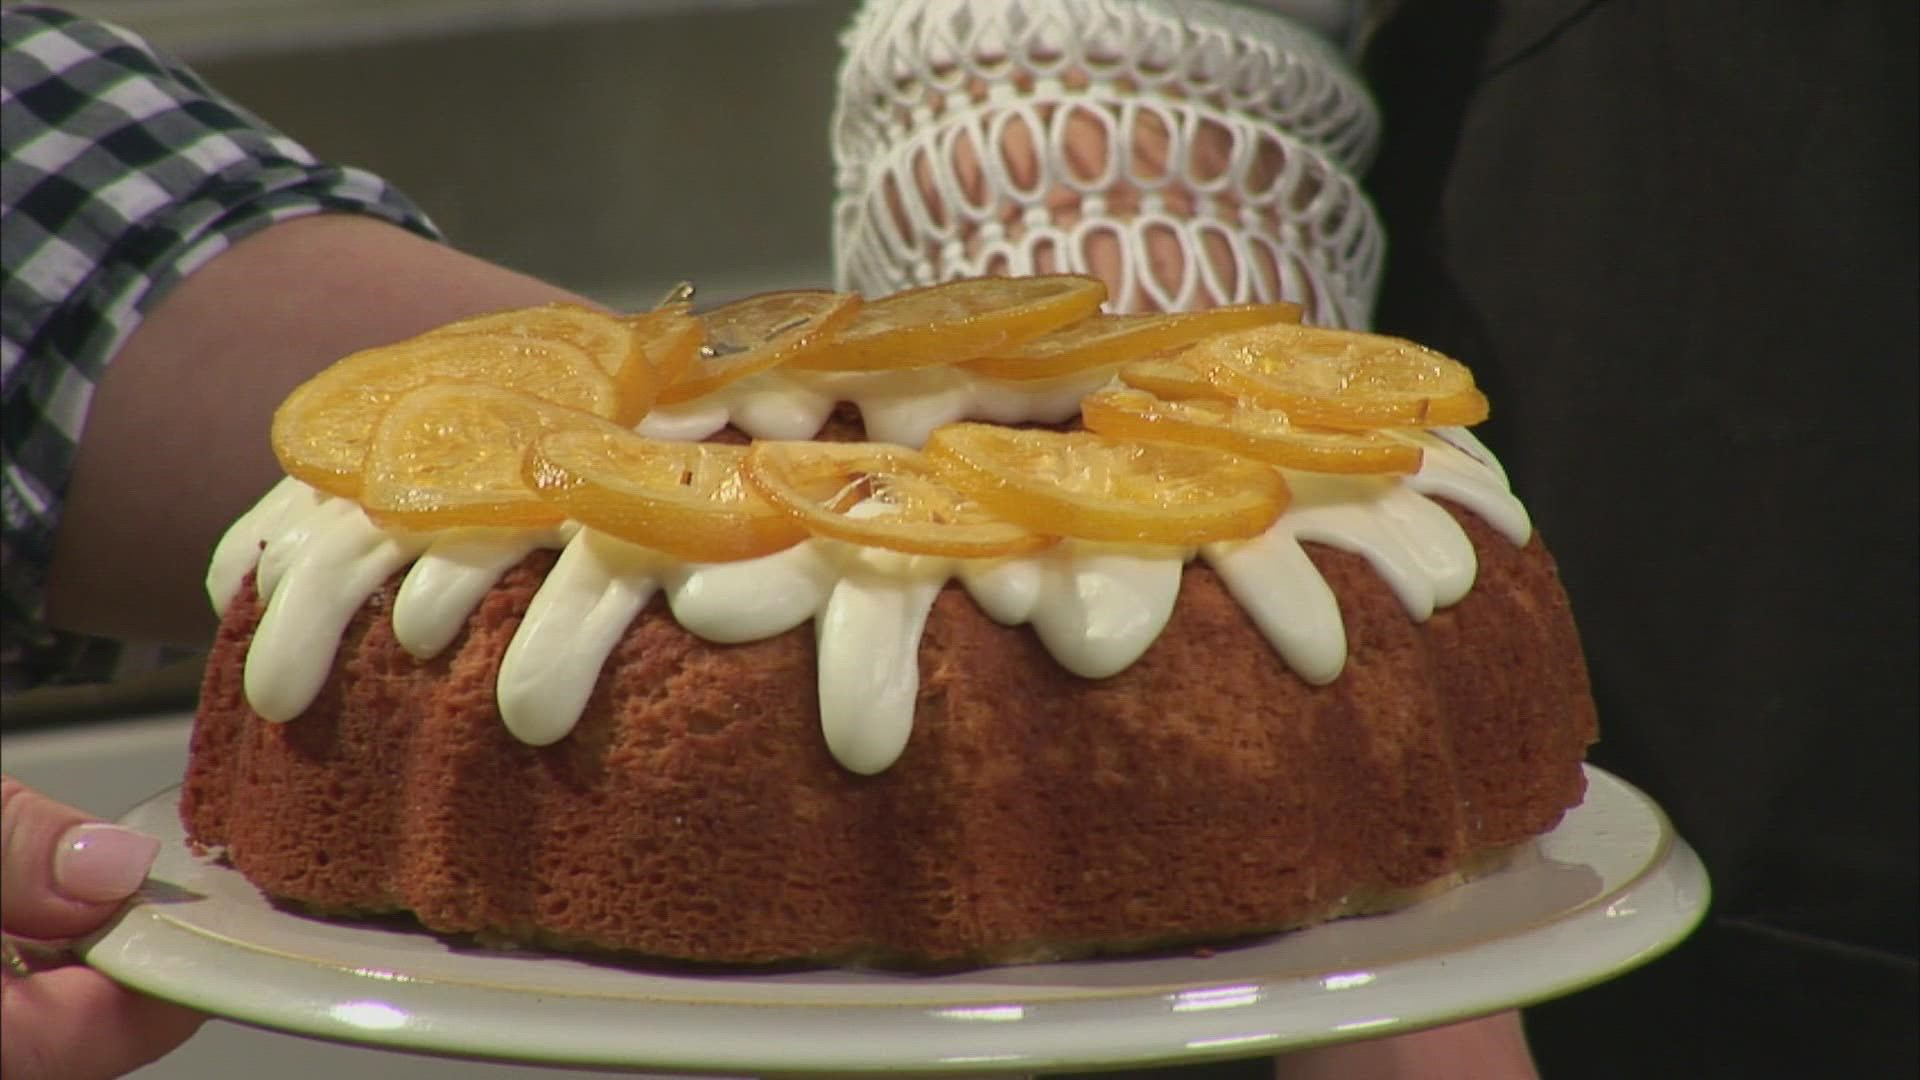 Tara Cannaday from Pot + Pan shows us how to make candied lemons to be used on a cake.